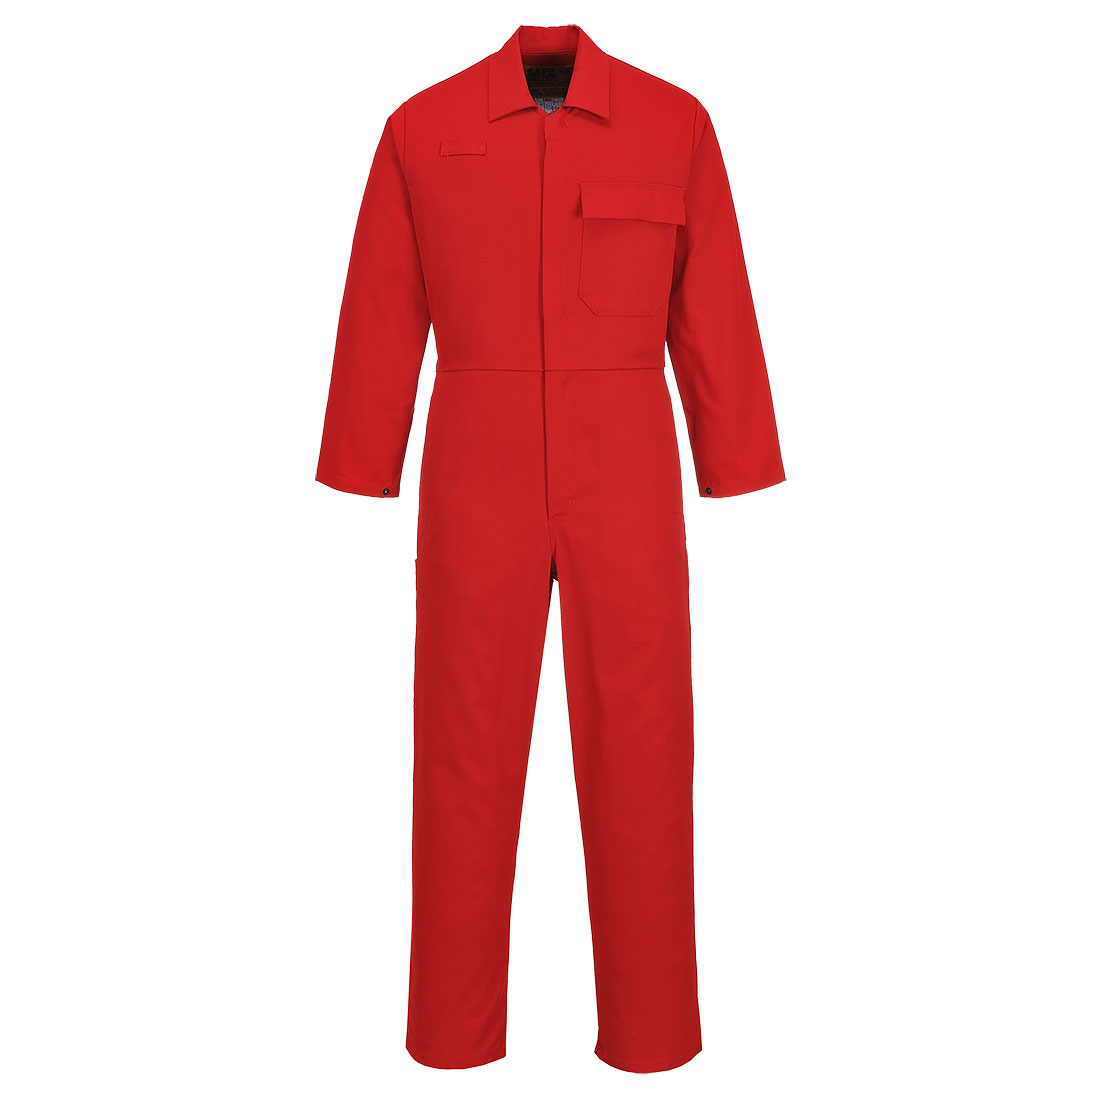  Flame Resistant Comfortable Cotton Industrial Welder Coverall 